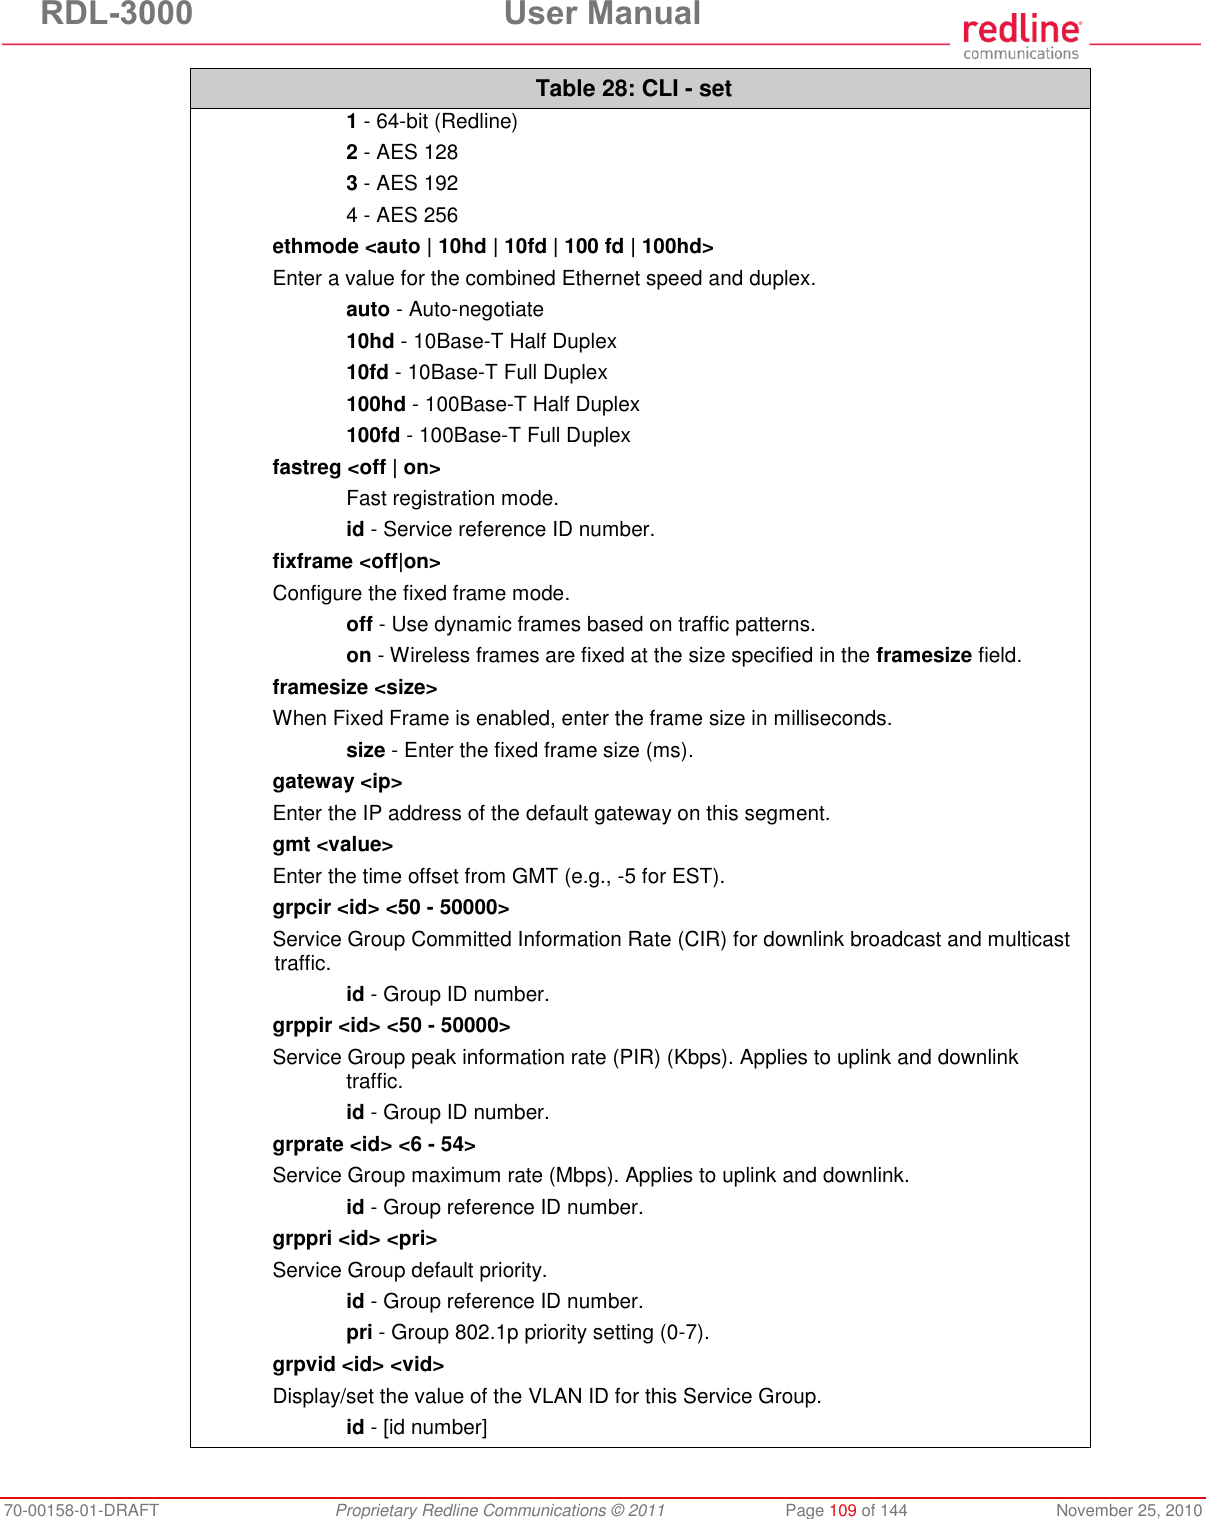 RDL-3000  User Manual 70-00158-01-DRAFT  Proprietary Redline Communications © 2011  Page 109 of 144  November 25, 2010 Table 28: CLI - set  1 - 64-bit (Redline)  2 - AES 128  3 - AES 192  4 - AES 256 ethmode &lt;auto | 10hd | 10fd | 100 fd | 100hd&gt; Enter a value for the combined Ethernet speed and duplex.  auto - Auto-negotiate  10hd - 10Base-T Half Duplex  10fd - 10Base-T Full Duplex  100hd - 100Base-T Half Duplex  100fd - 100Base-T Full Duplex fastreg &lt;off | on&gt;   Fast registration mode.  id - Service reference ID number. fixframe &lt;off|on&gt; Configure the fixed frame mode.  off - Use dynamic frames based on traffic patterns.  on - Wireless frames are fixed at the size specified in the framesize field. framesize &lt;size&gt; When Fixed Frame is enabled, enter the frame size in milliseconds.  size - Enter the fixed frame size (ms). gateway &lt;ip&gt; Enter the IP address of the default gateway on this segment. gmt &lt;value&gt; Enter the time offset from GMT (e.g., -5 for EST). grpcir &lt;id&gt; &lt;50 - 50000&gt; Service Group Committed Information Rate (CIR) for downlink broadcast and multicast traffic.  id - Group ID number. grppir &lt;id&gt; &lt;50 - 50000&gt; Service Group peak information rate (PIR) (Kbps). Applies to uplink and downlink traffic.  id - Group ID number. grprate &lt;id&gt; &lt;6 - 54&gt; Service Group maximum rate (Mbps). Applies to uplink and downlink.  id - Group reference ID number. grppri &lt;id&gt; &lt;pri&gt; Service Group default priority.  id - Group reference ID number.  pri - Group 802.1p priority setting (0-7). grpvid &lt;id&gt; &lt;vid&gt; Display/set the value of the VLAN ID for this Service Group.  id - [id number] 